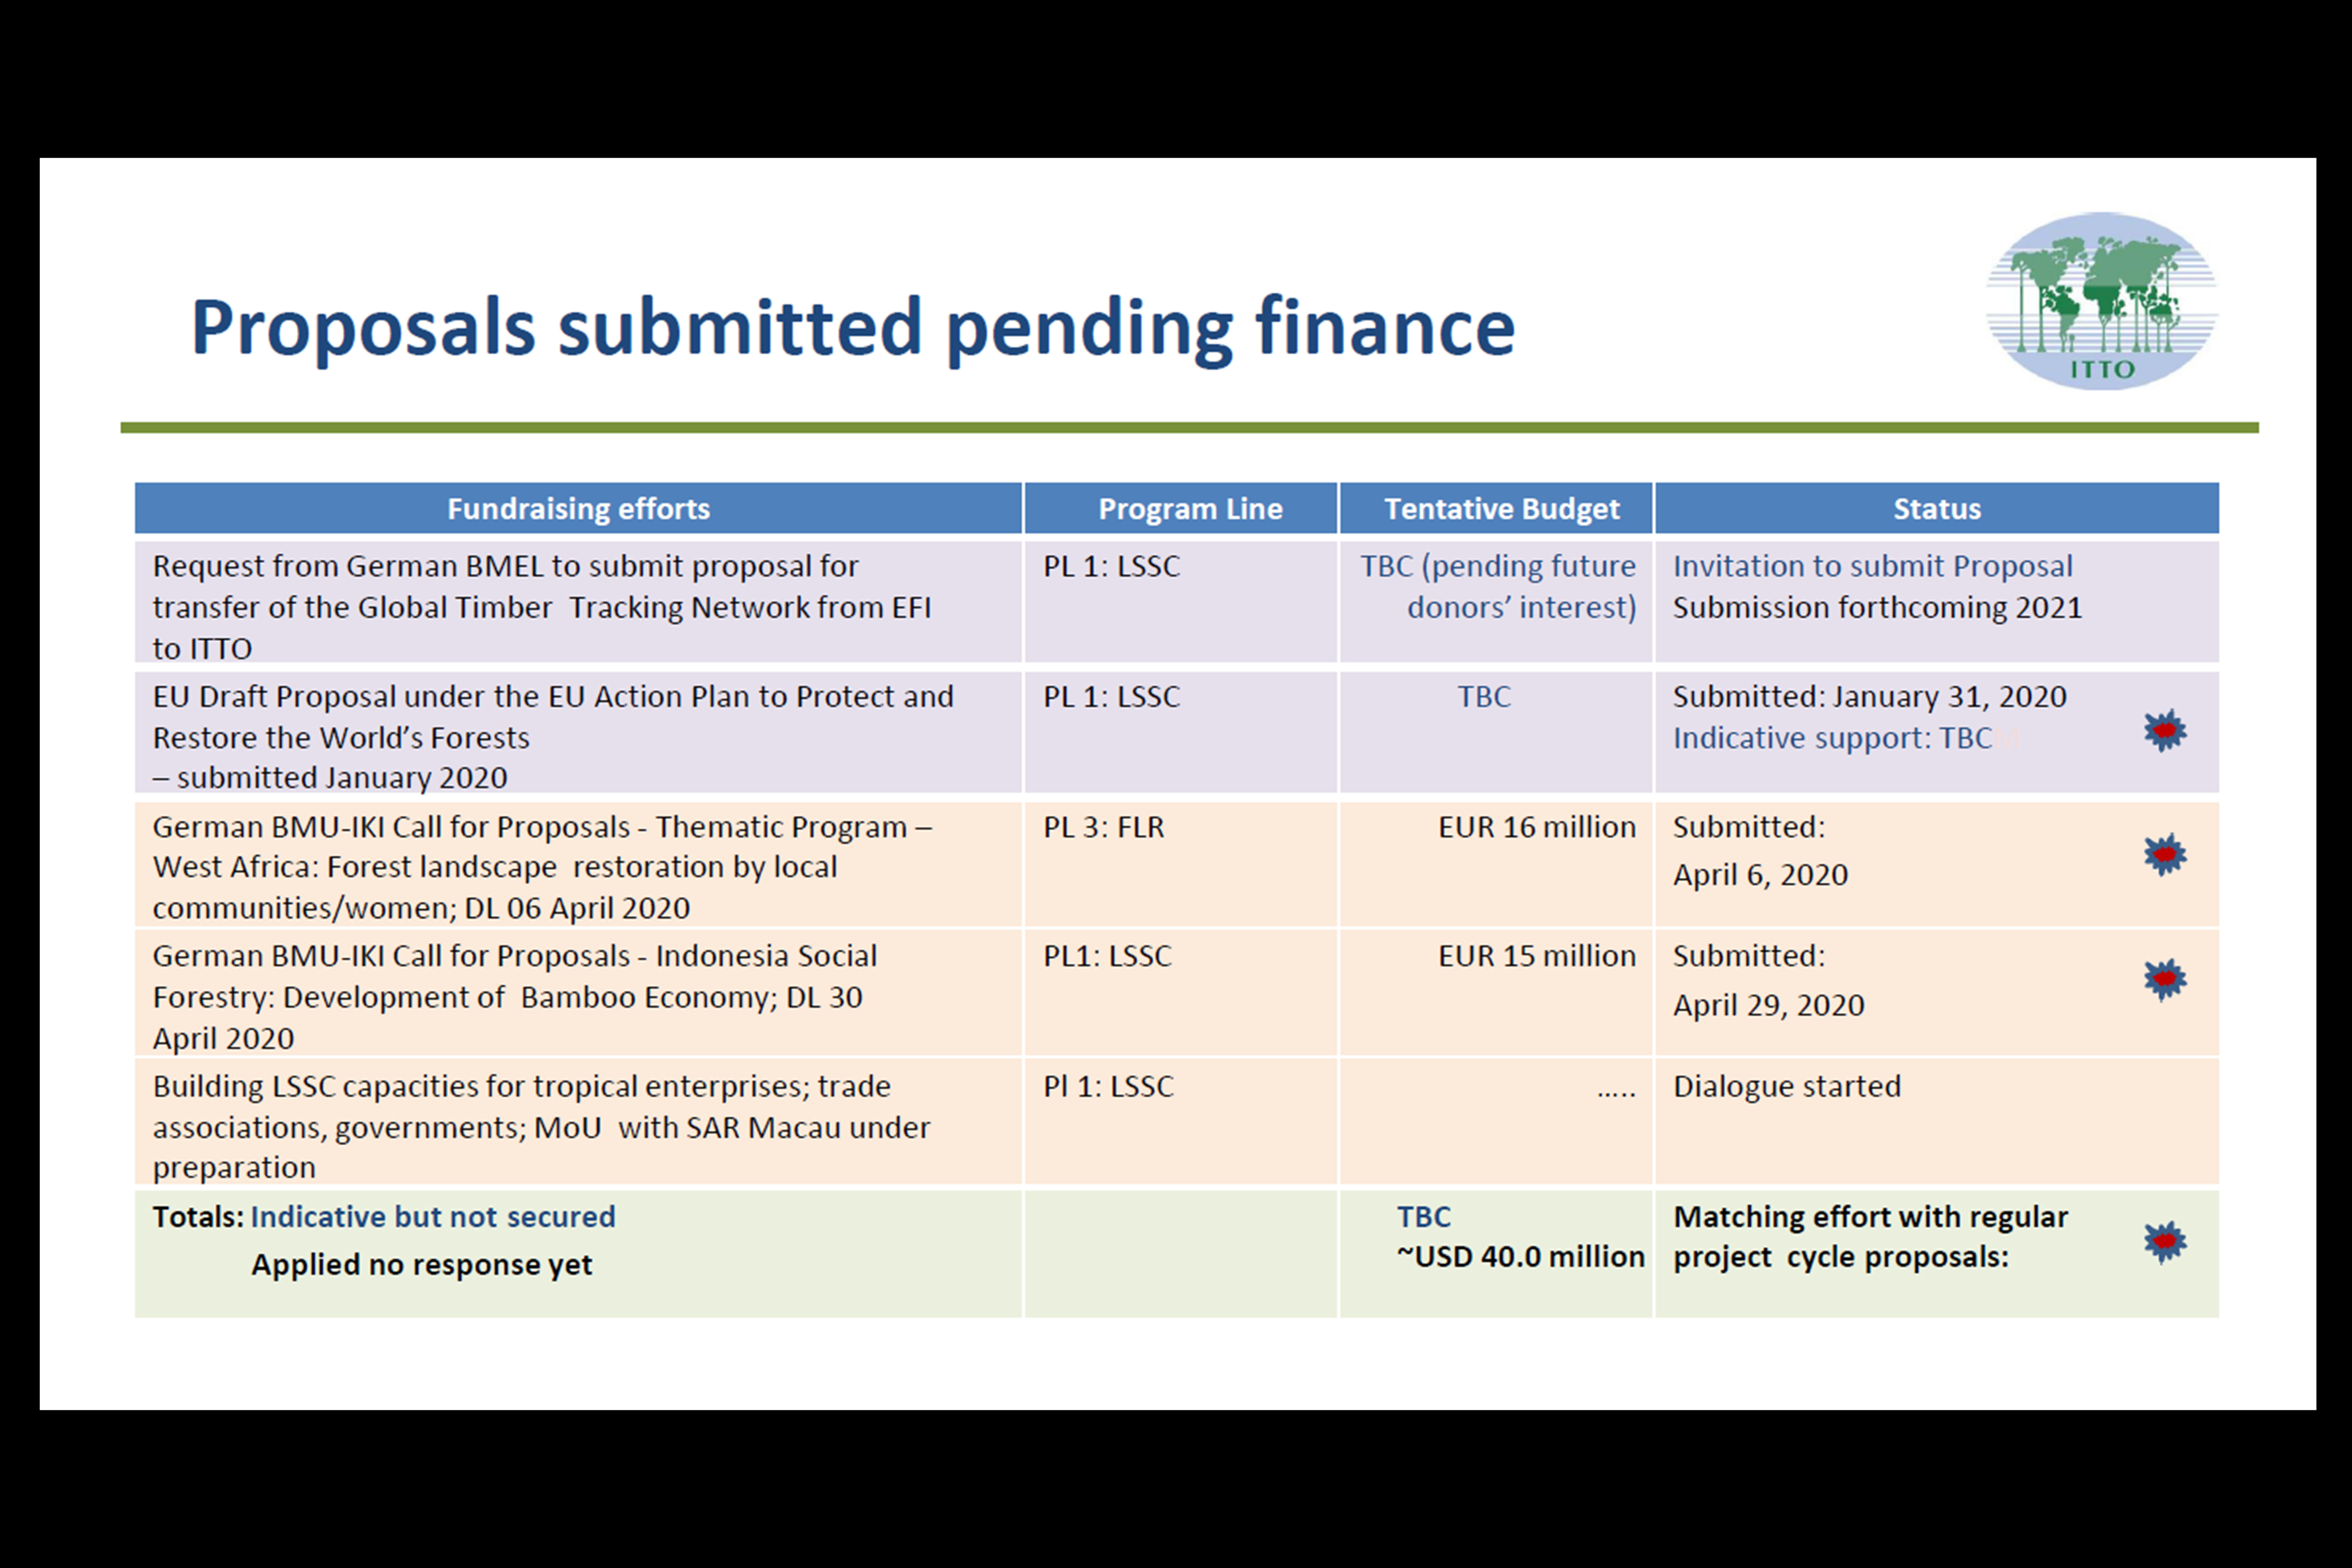 Slide from the Executive Director’s presentation on implementation of ITTO’s New Financing Architecture and related fundraising efforts.